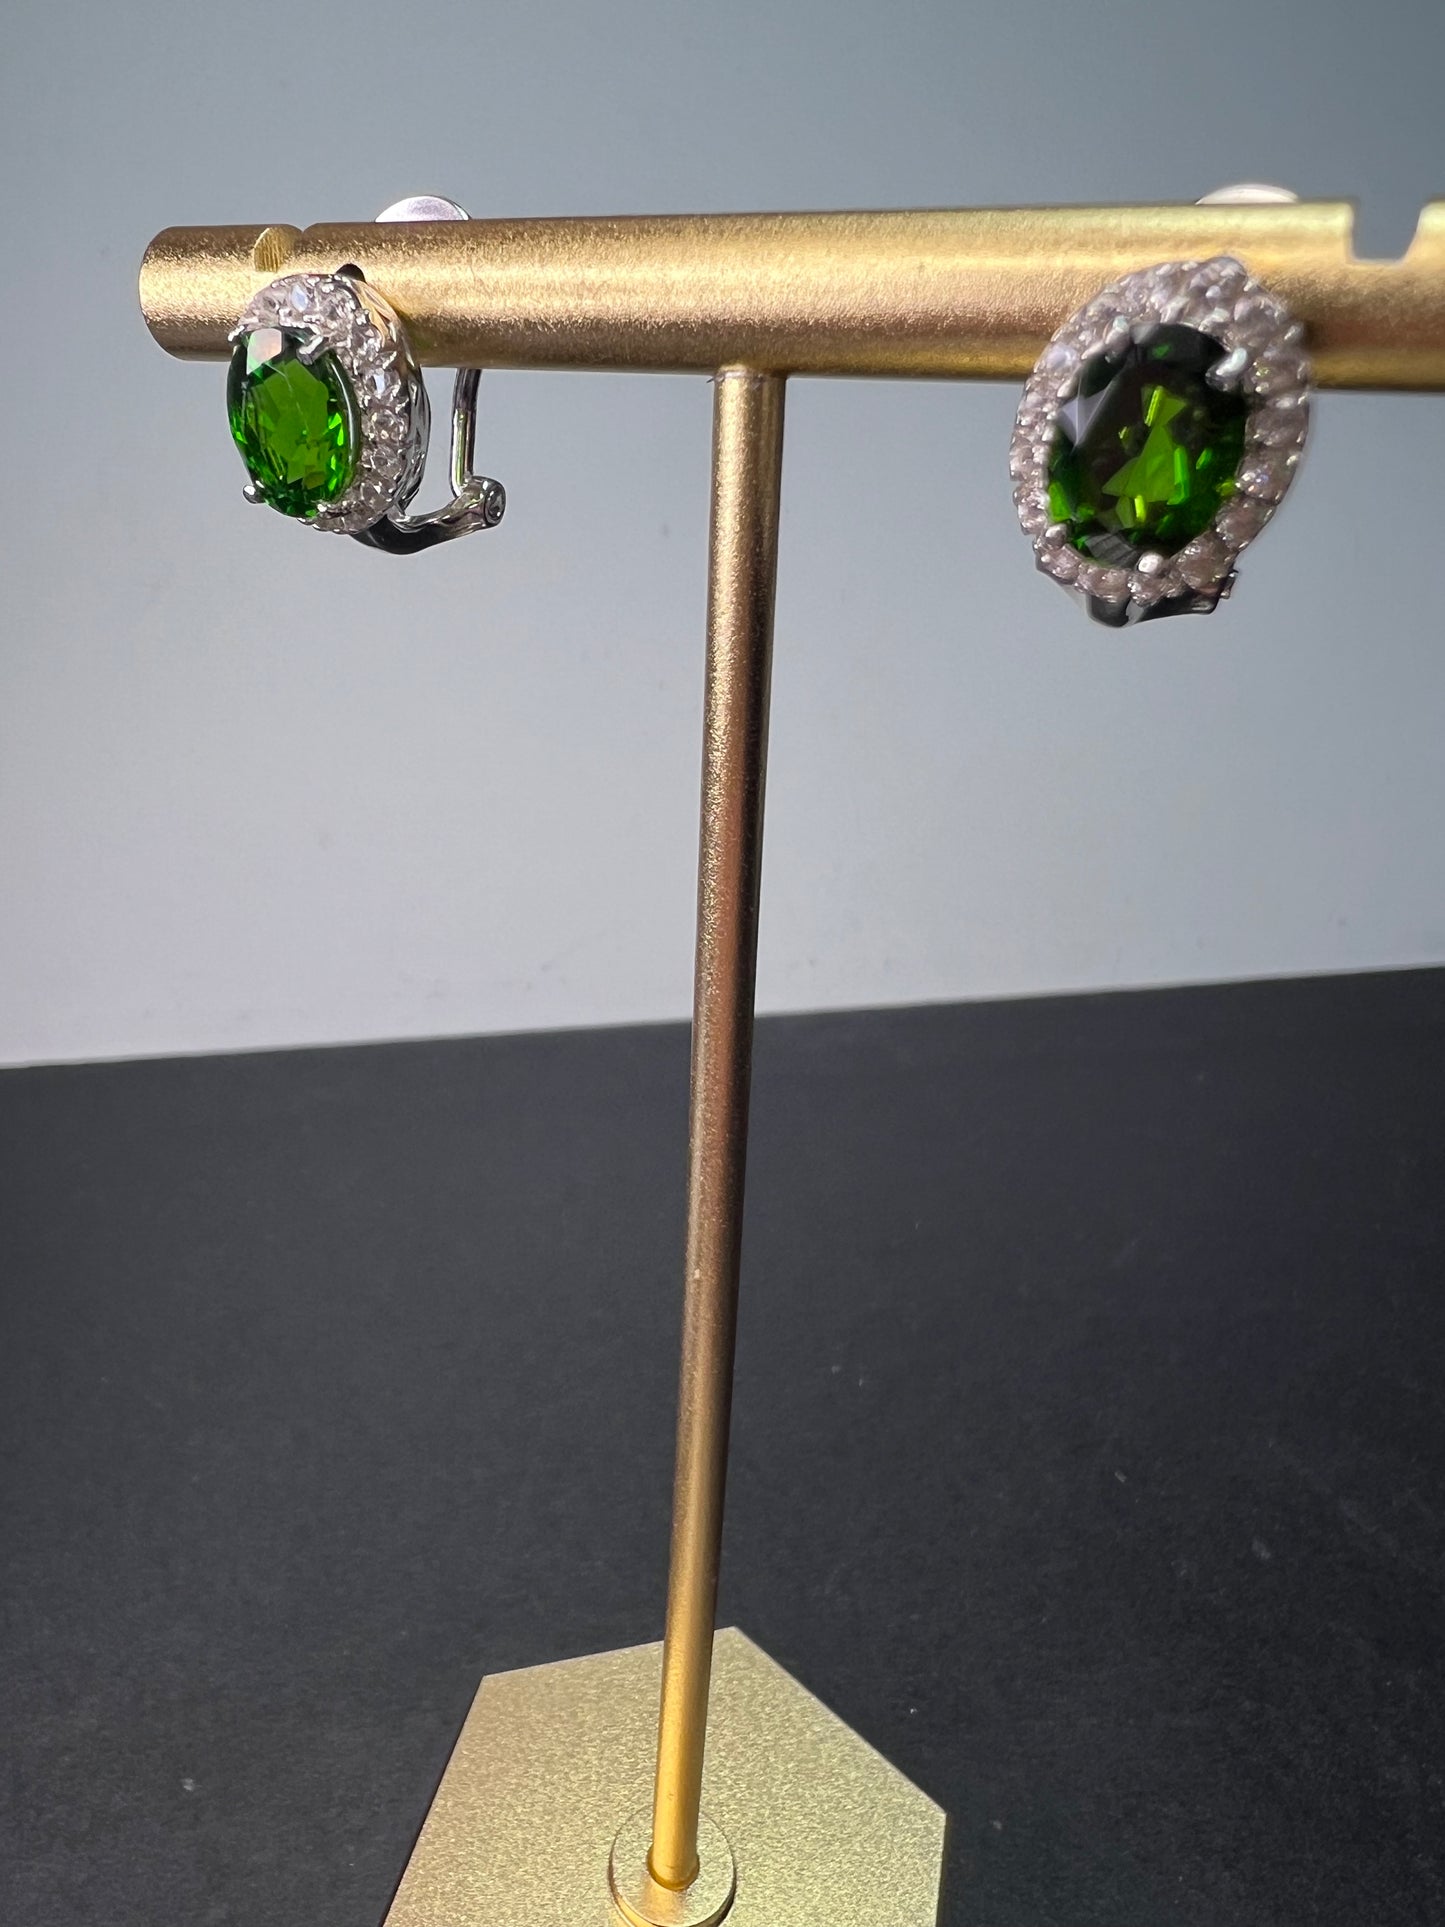 Russian chrome diopside sterling silver halo earrings